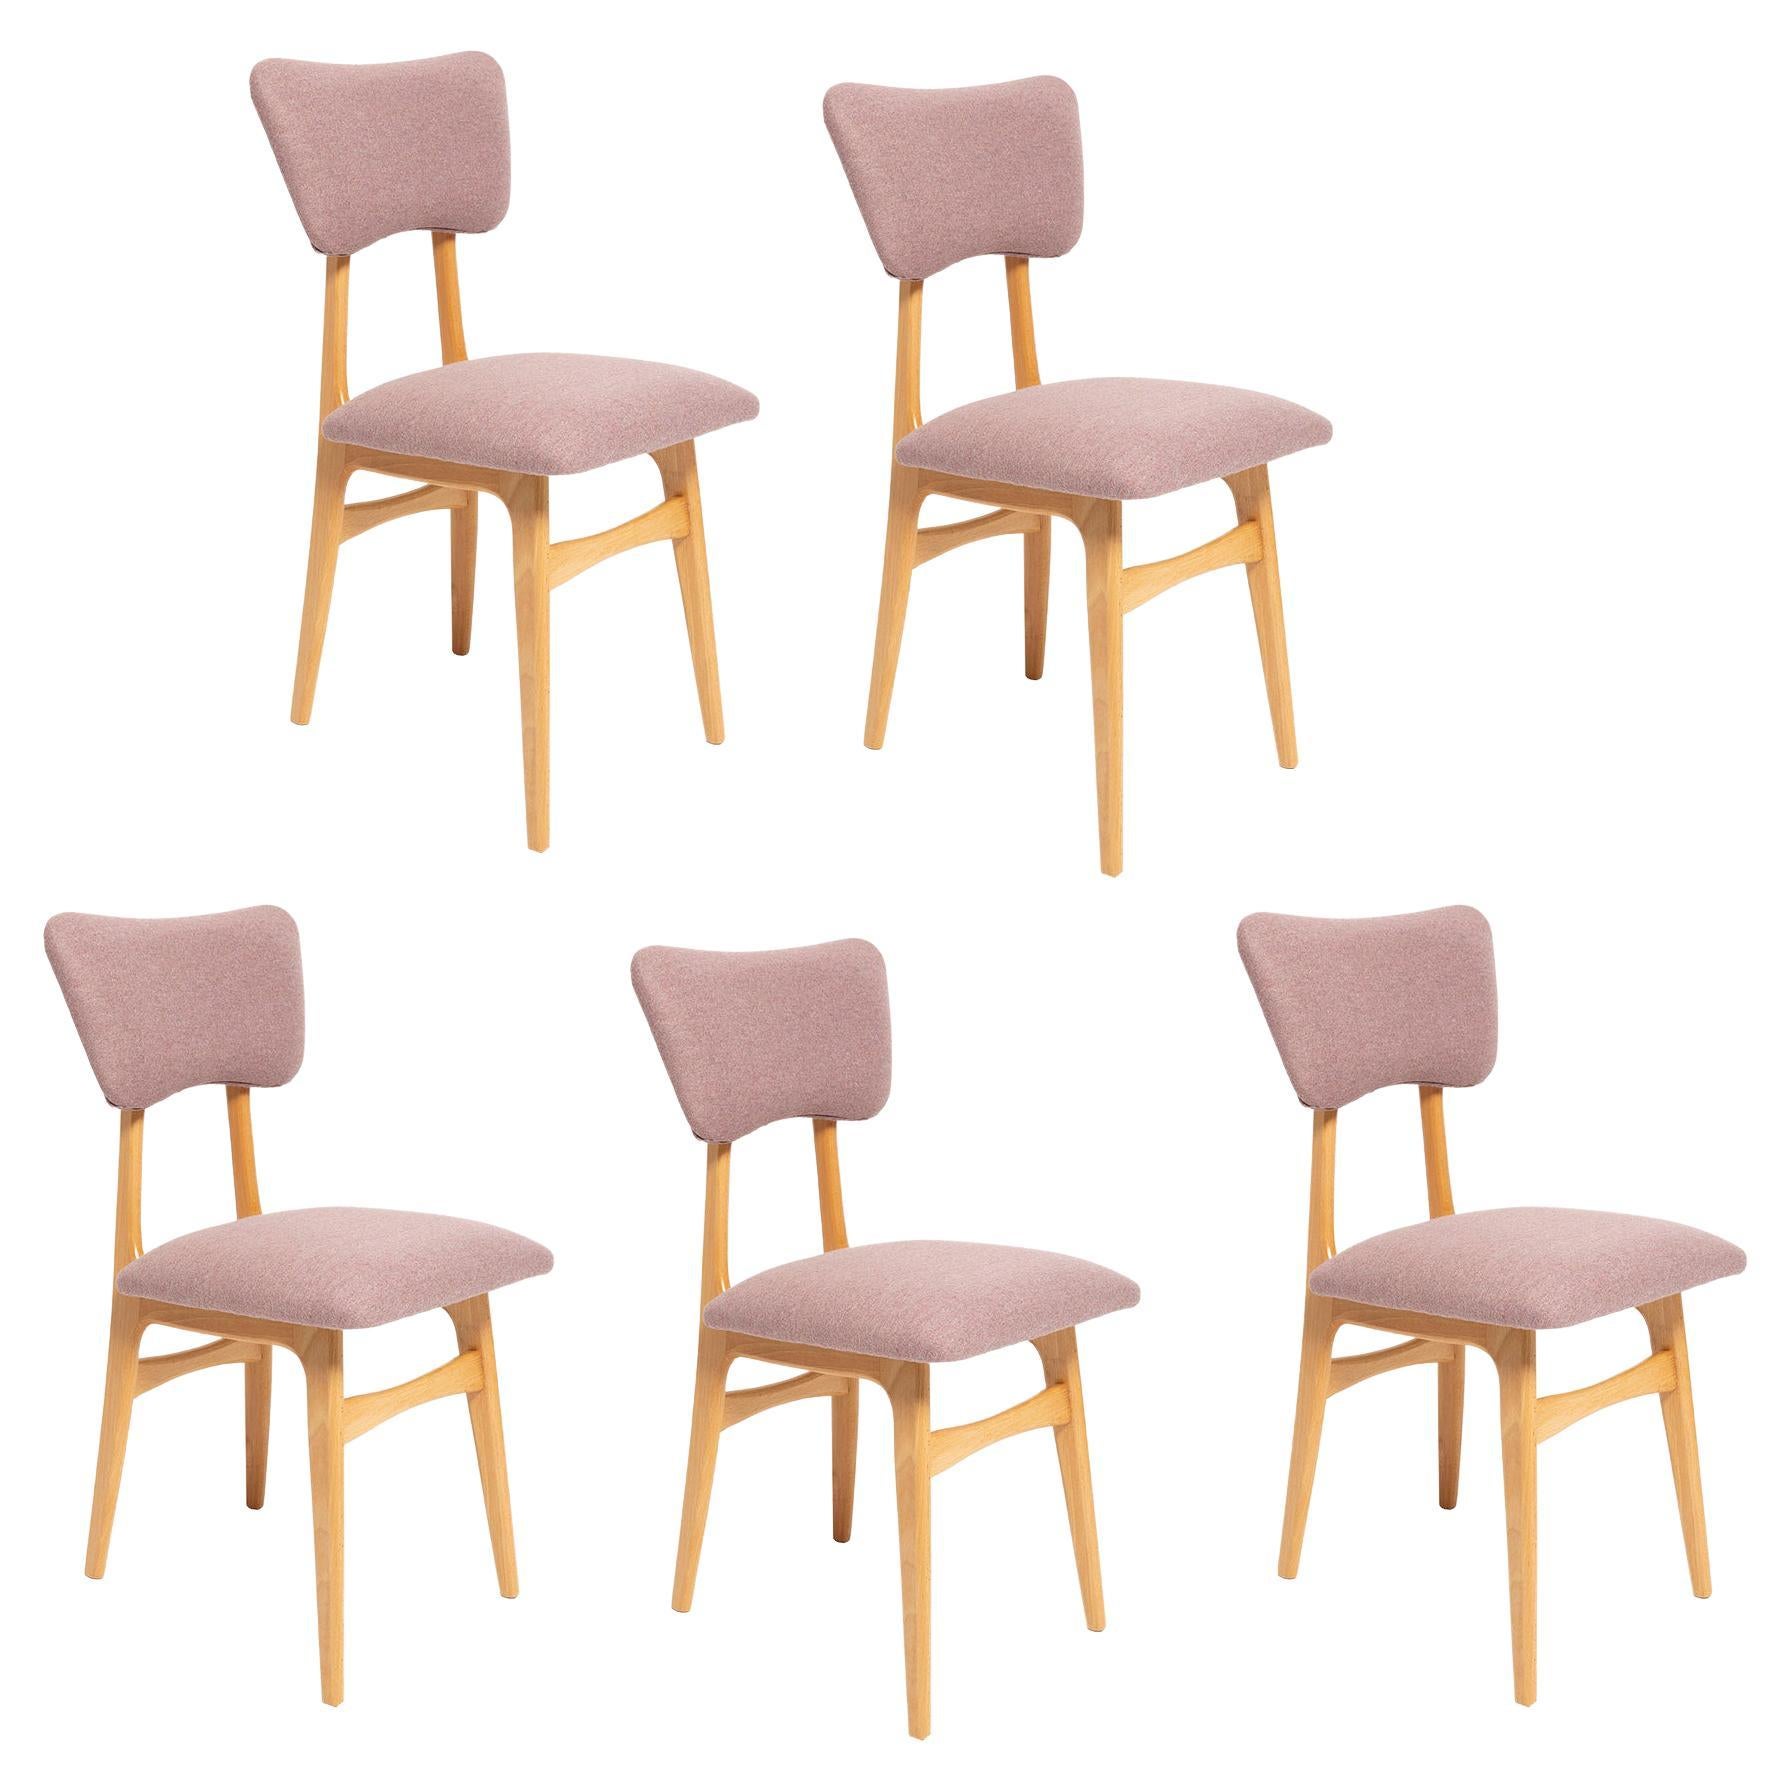 Five 20th Century Butterfly Dining Chairs, Pink Wool, Light Wood, Europe, 1960s For Sale